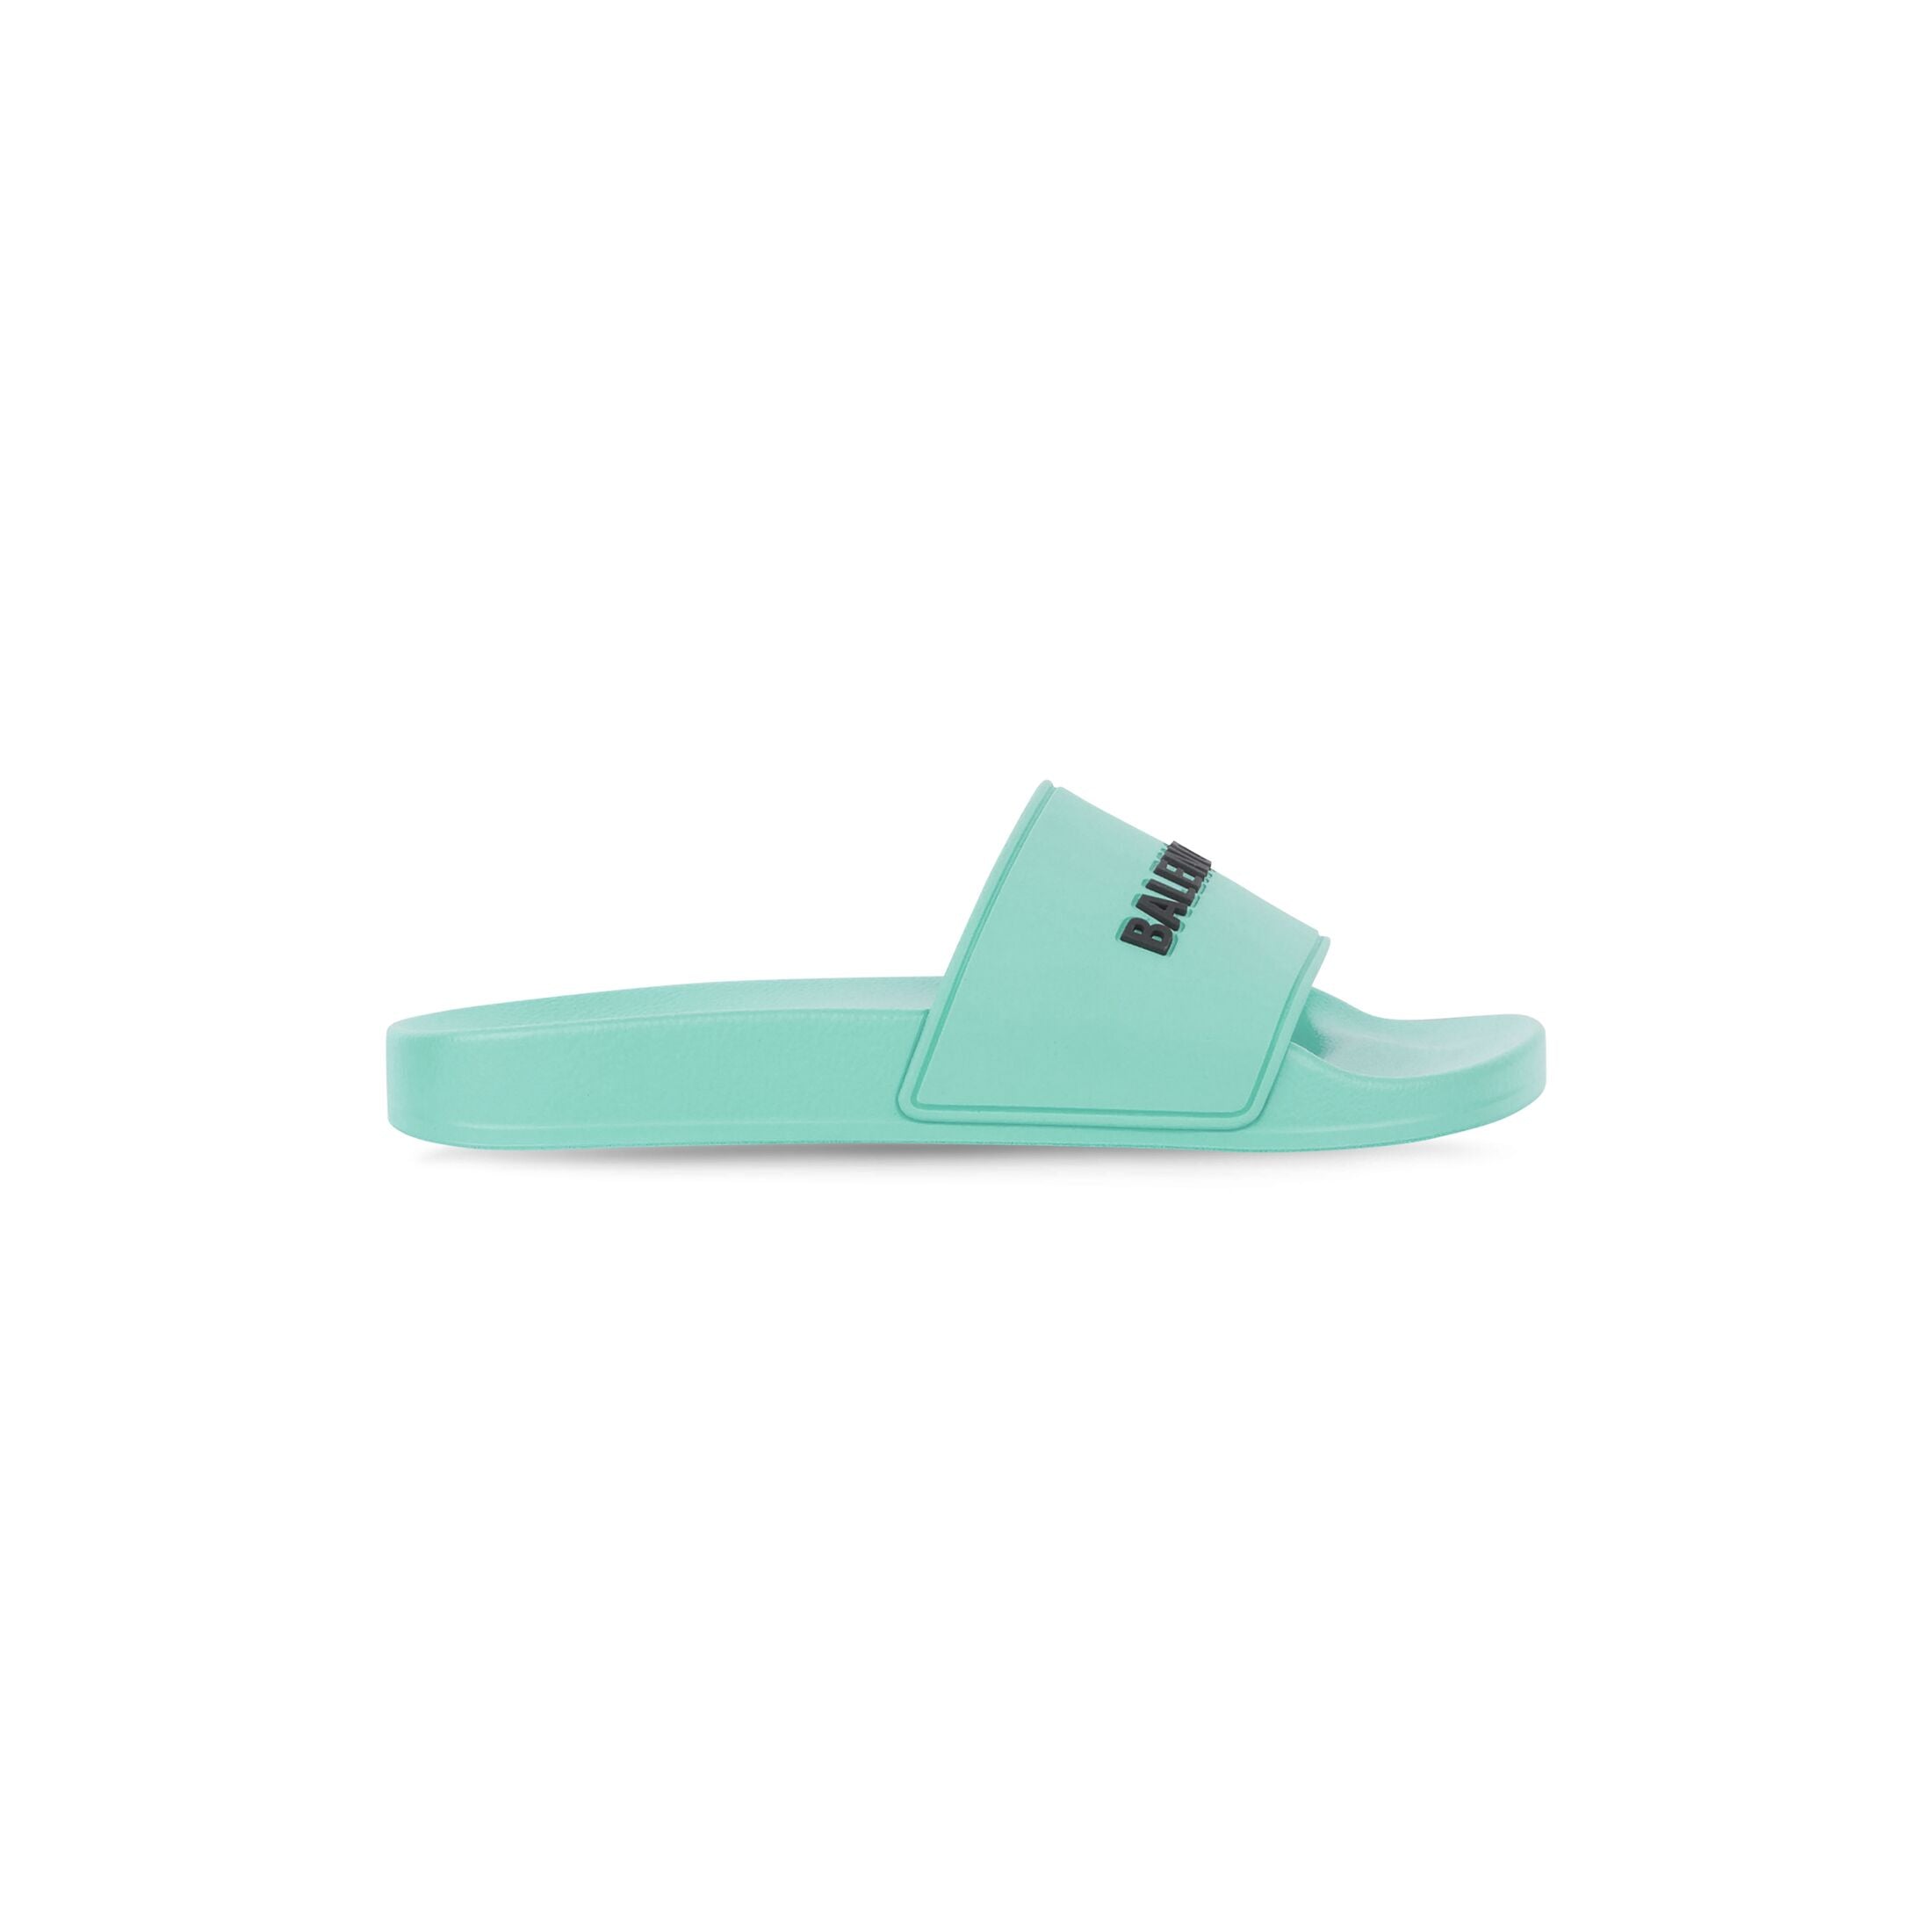 Balenciaga Pool Slide In Light Green and Black Rubber